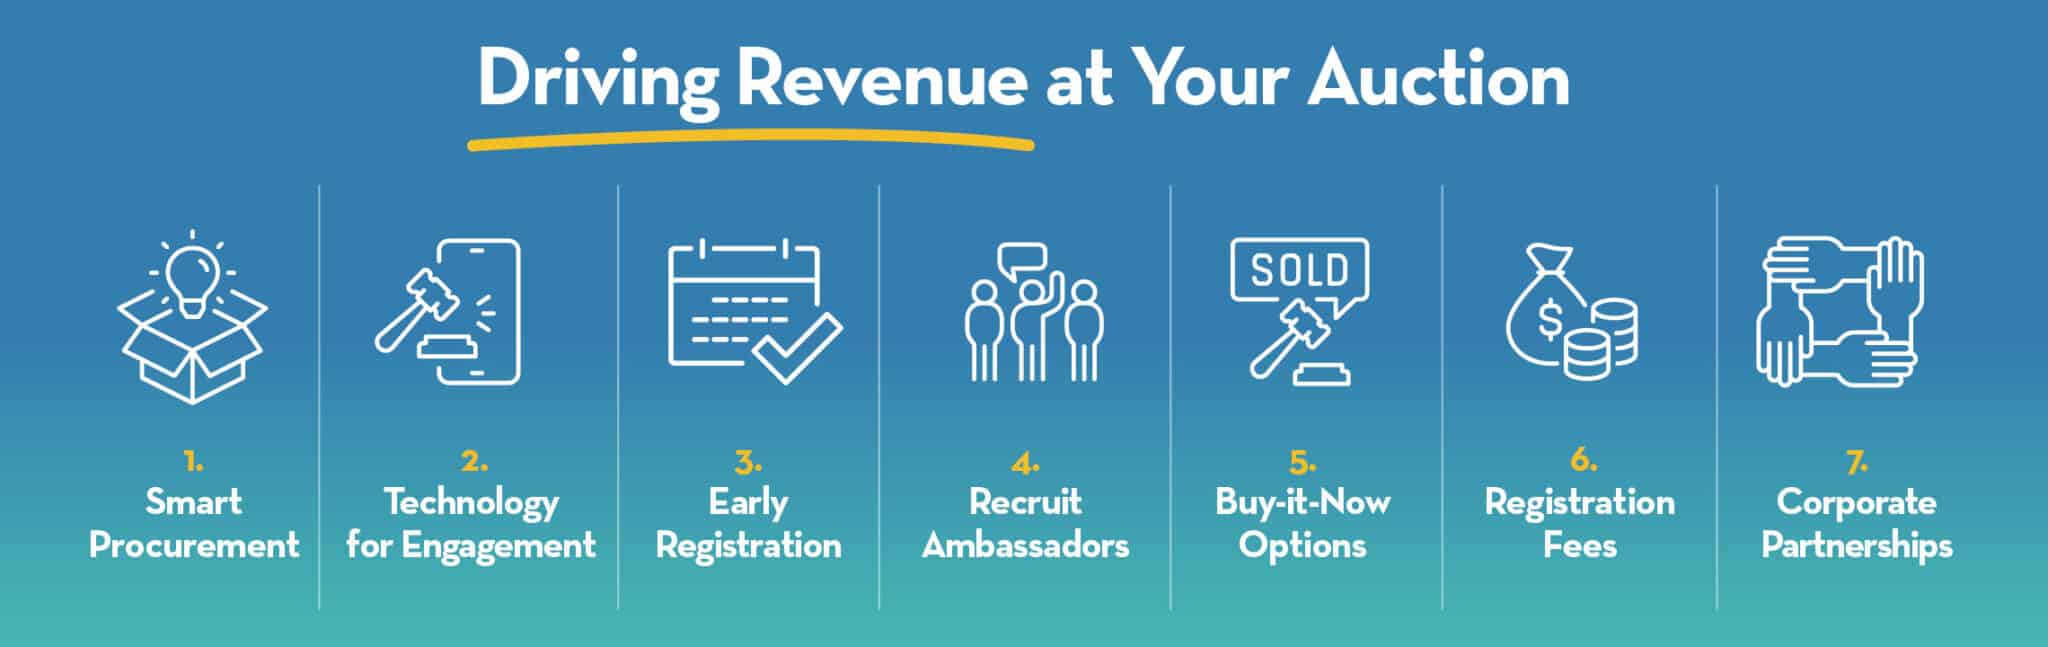 Driving revenue at your auction